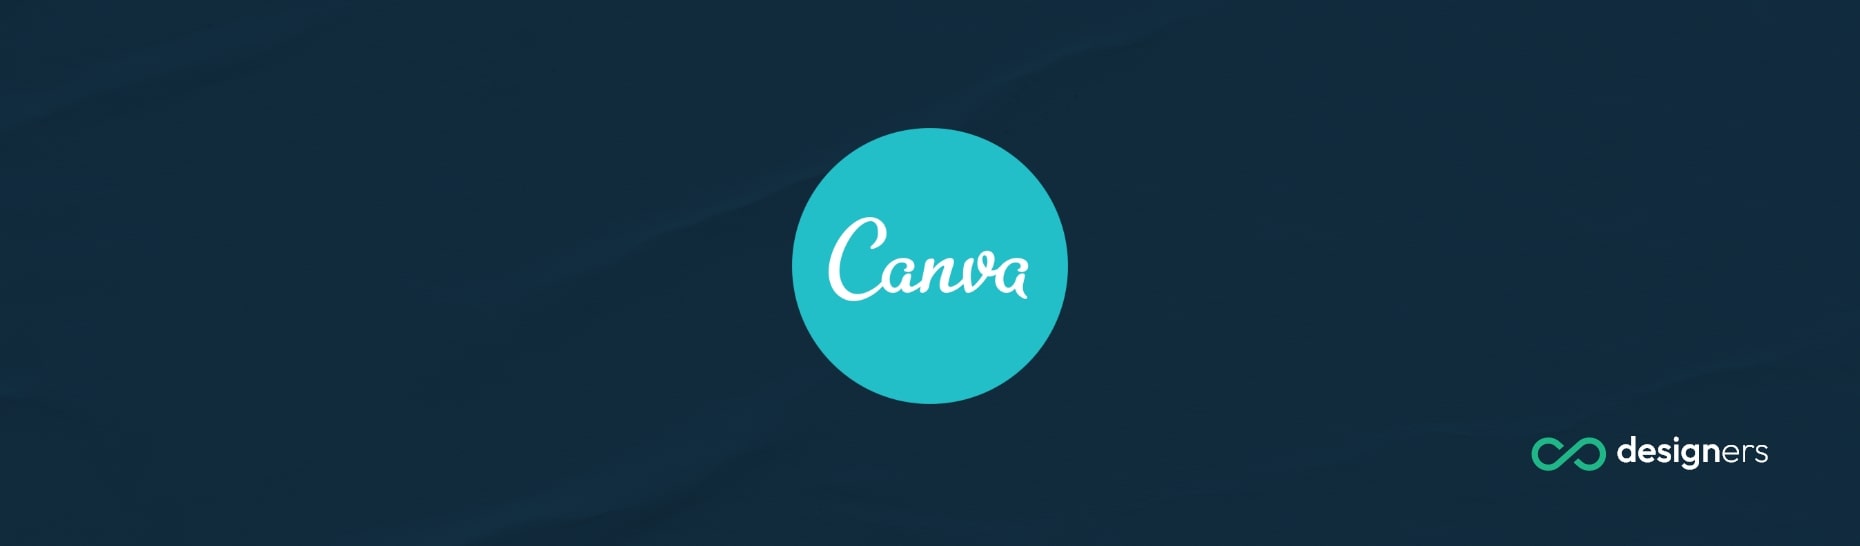 Are Canva Posters Good Quality?